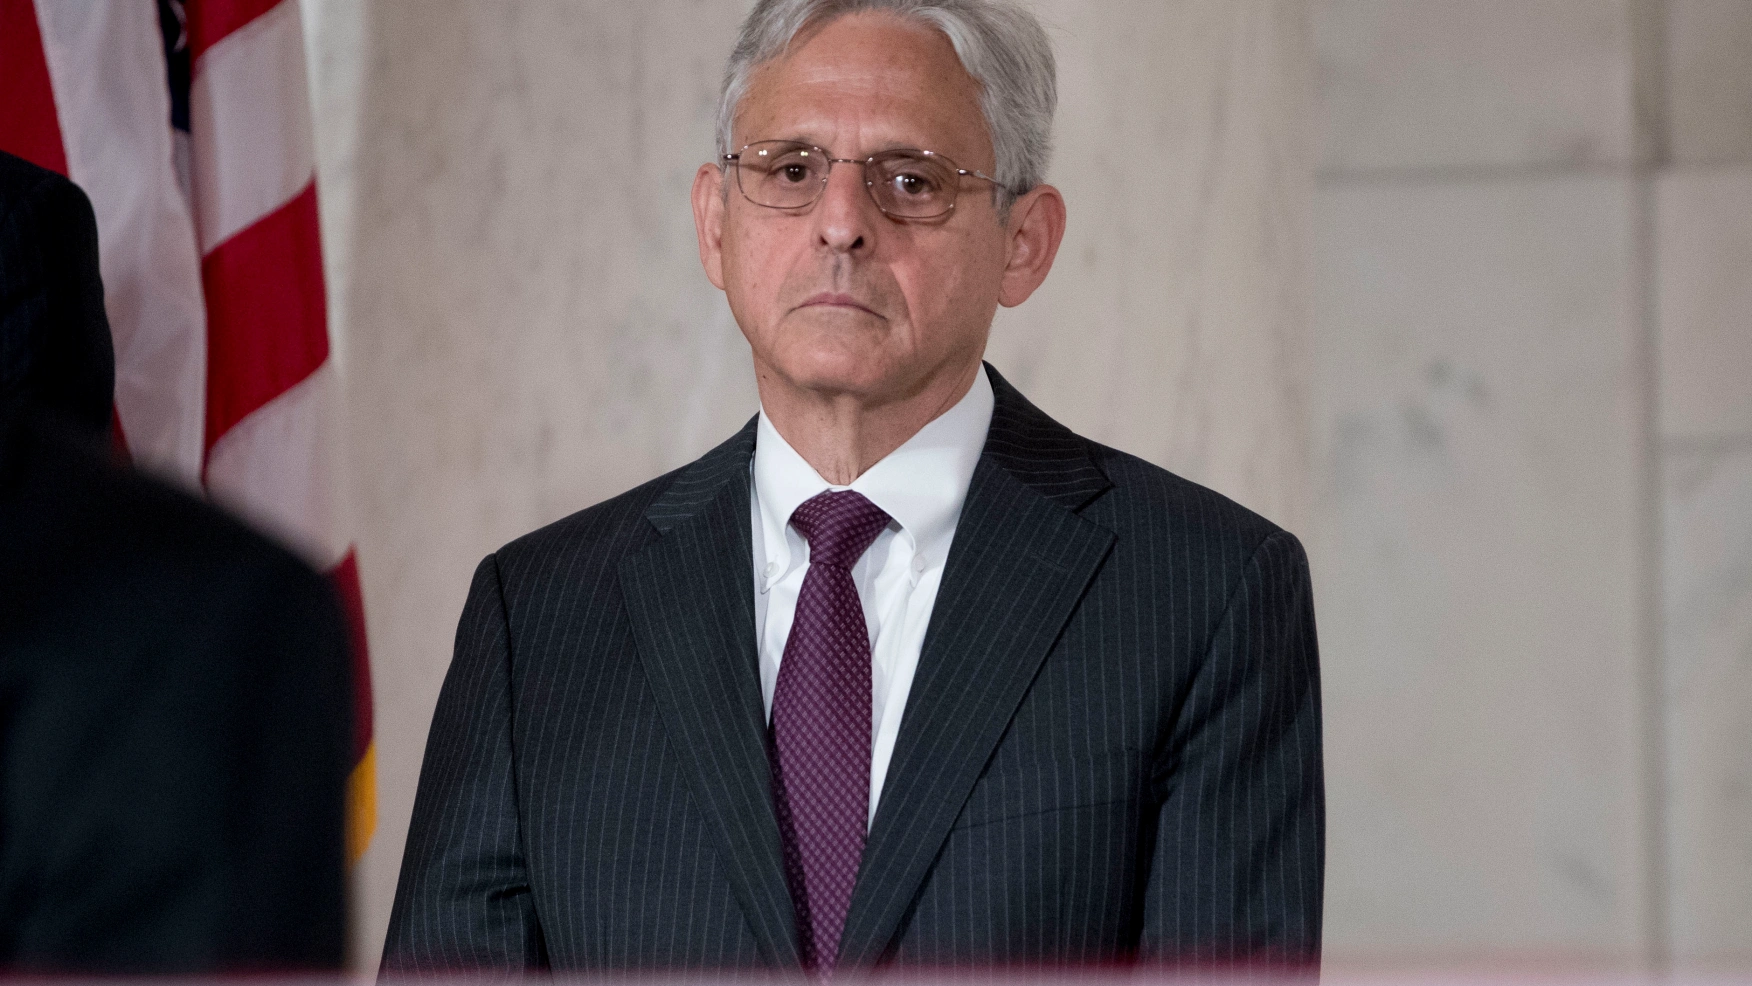 Just in: House Oversight Committee adopts resolution recommending that Merrick Garland be held in contempt of Congress for defying a subpoena |  The Gateway expert